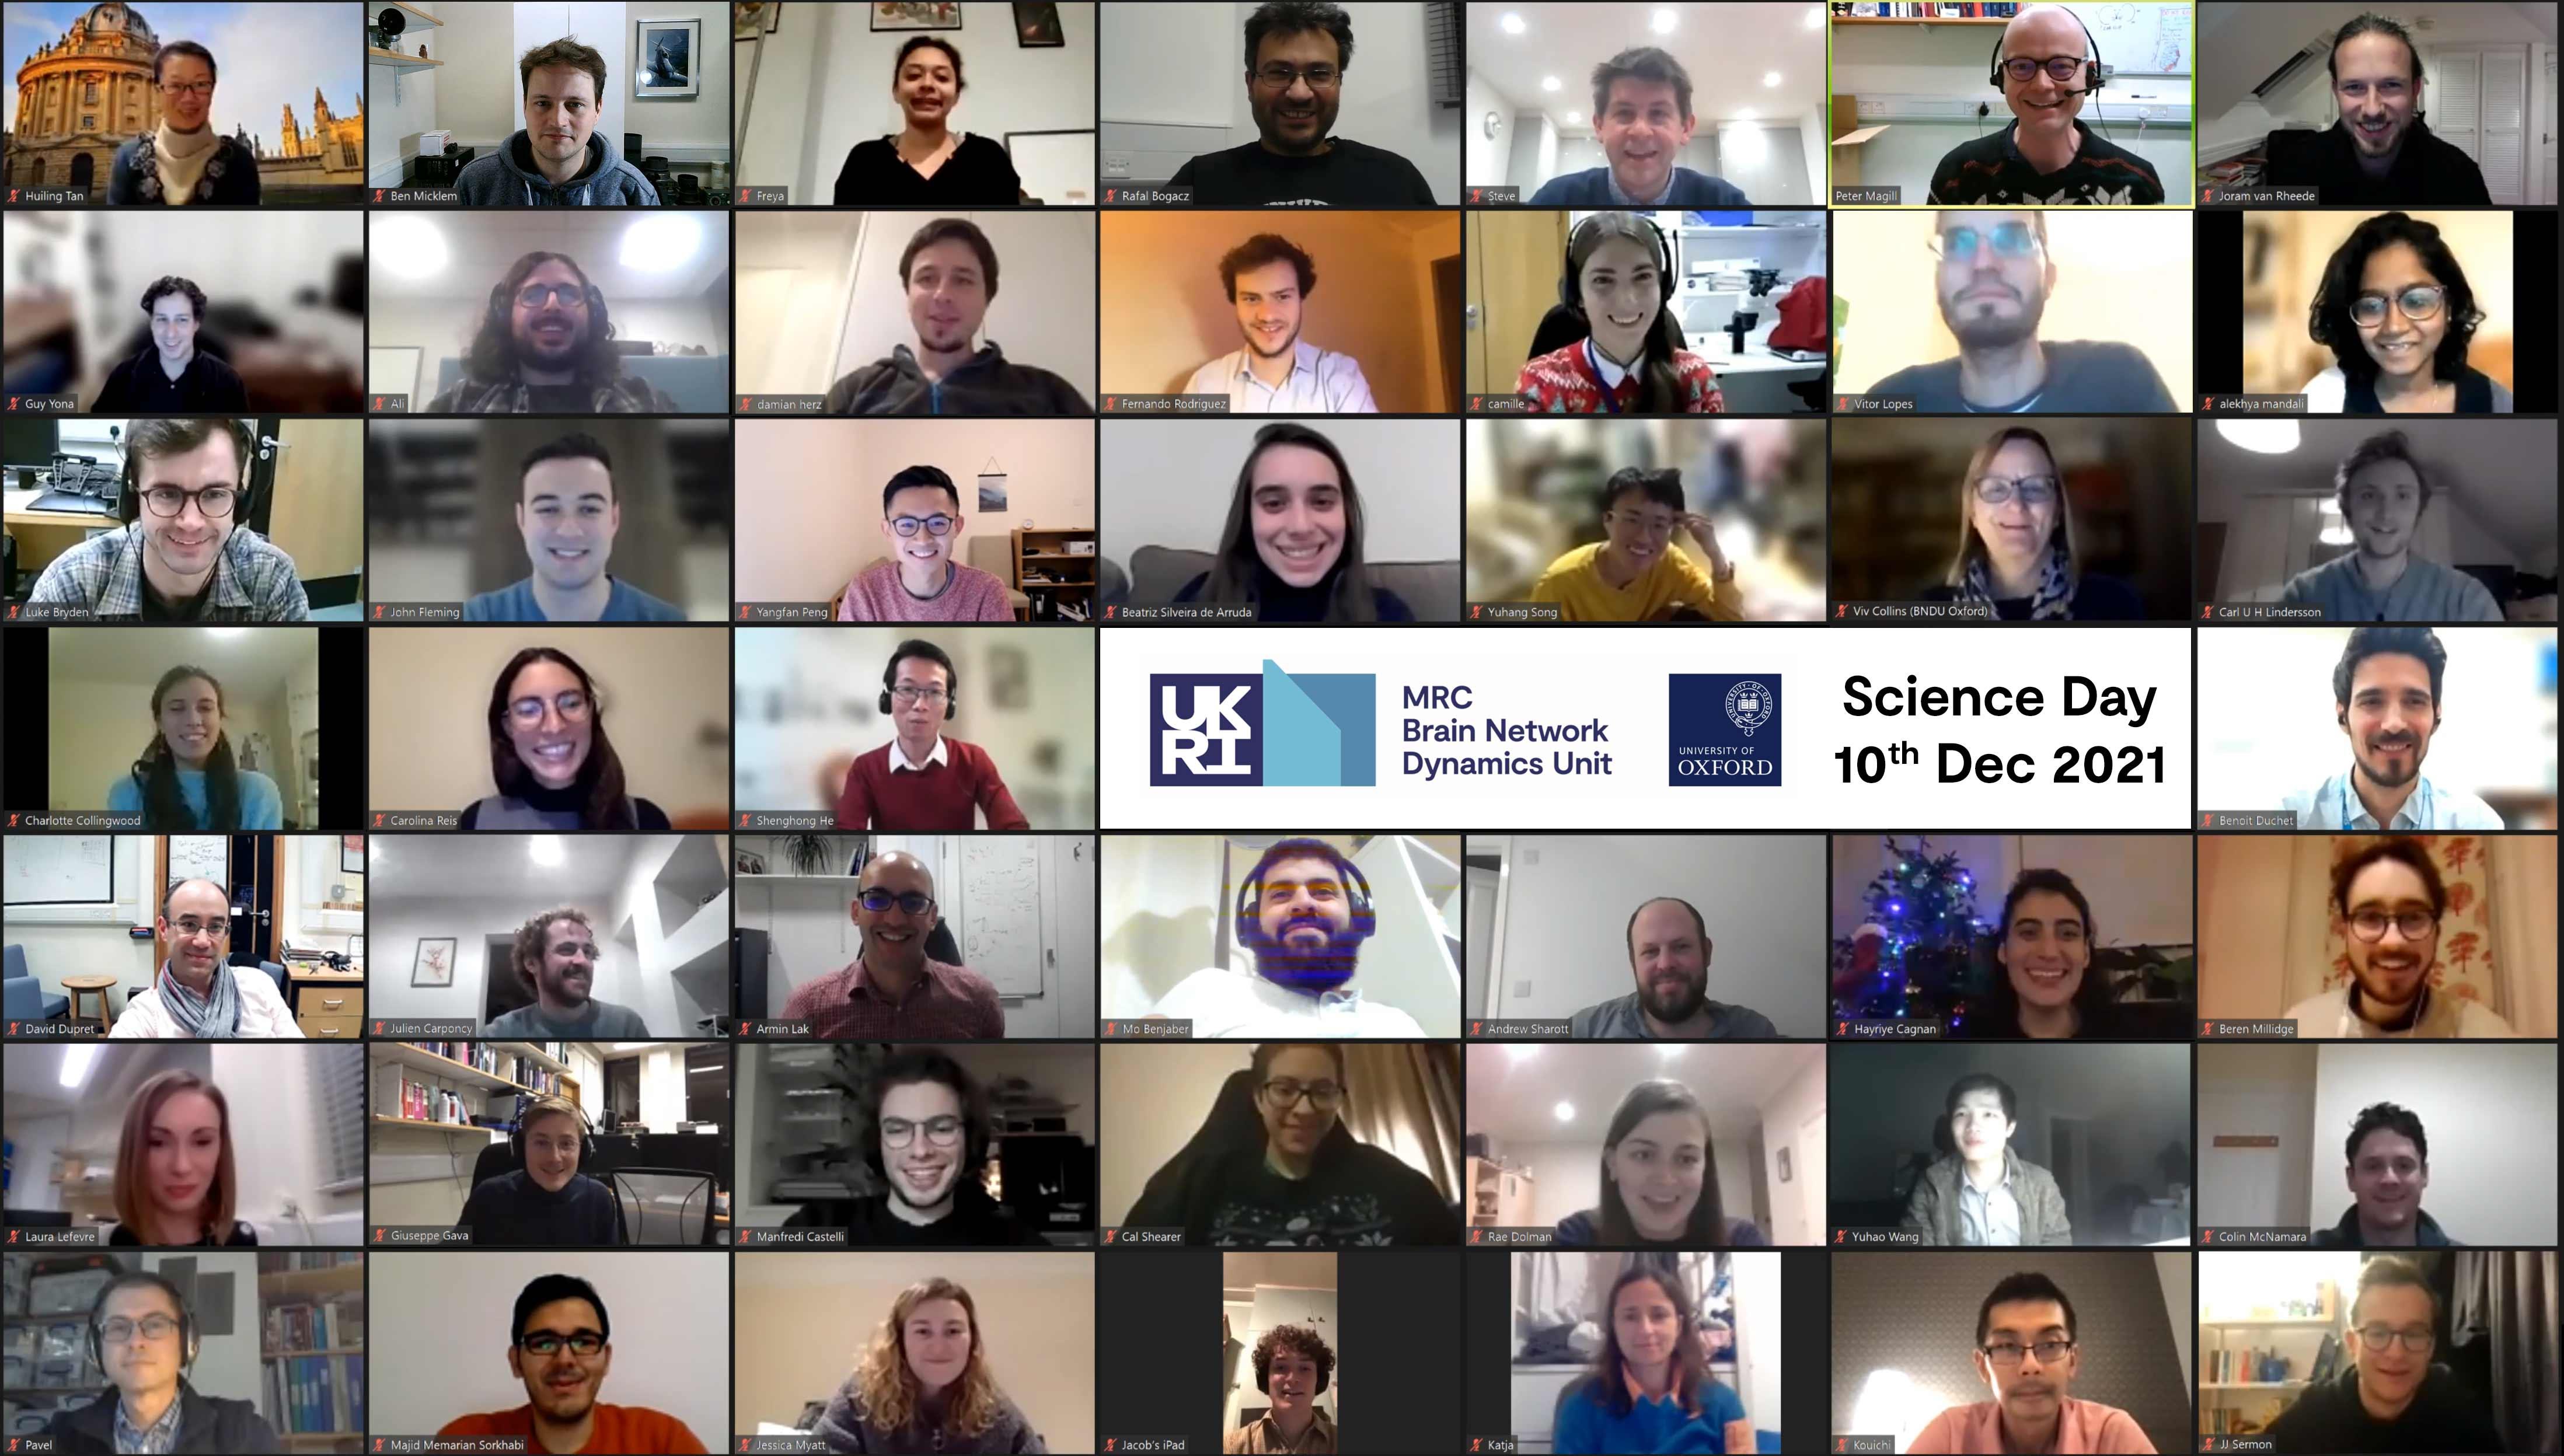 Zoo screenshot showing webcam images of smiling faces of those taking part in the Science Day event on 10th December 2021.